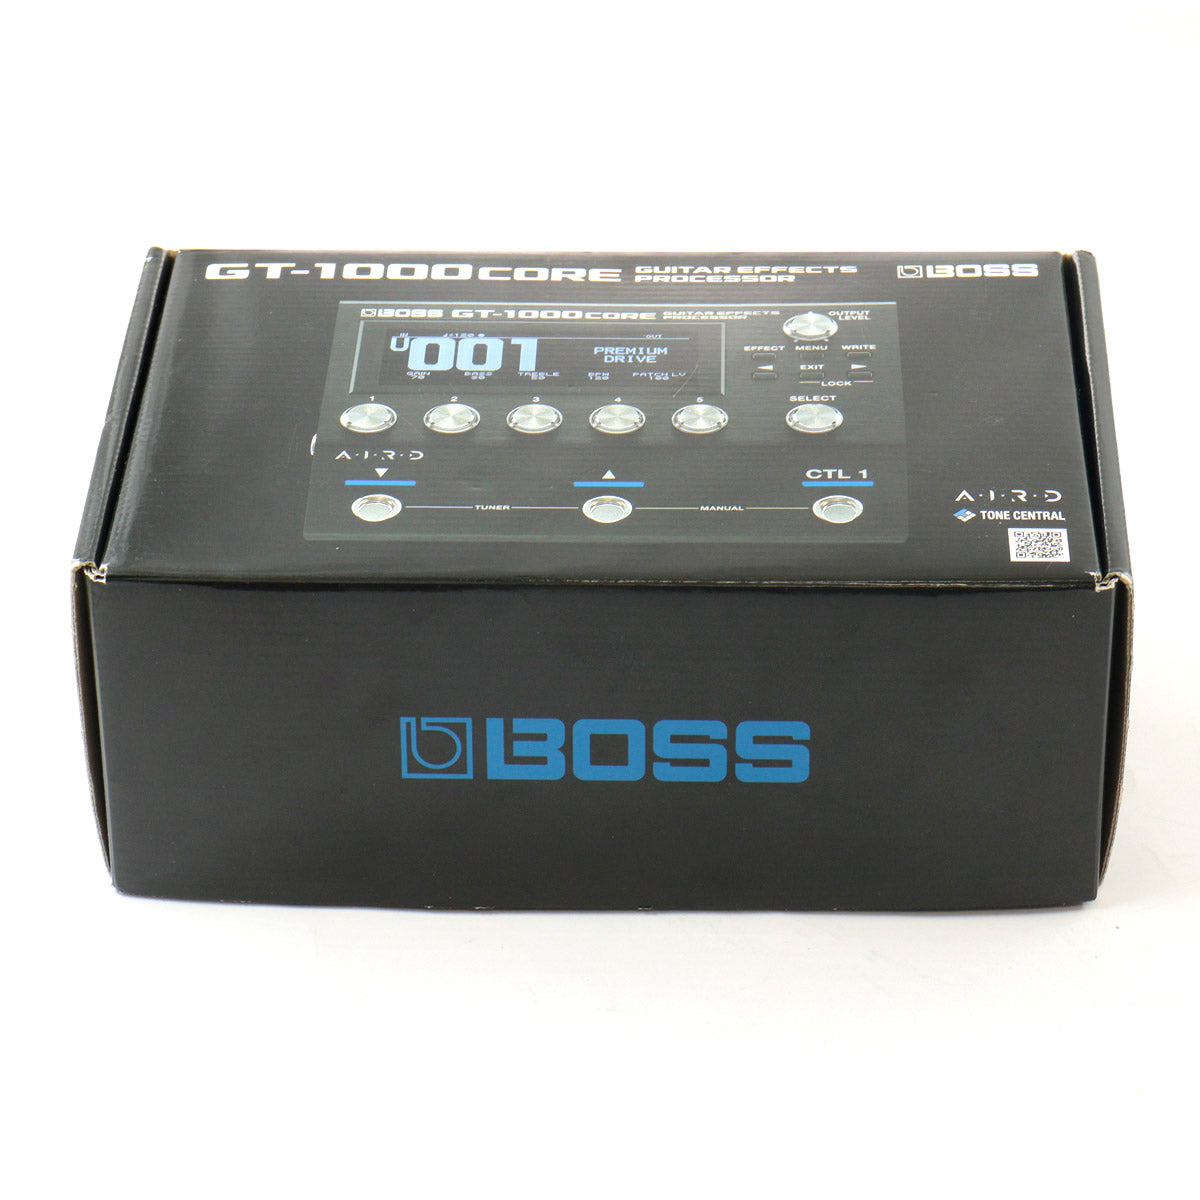 [SN Z7L0594] USED BOSS / GT-1000CORE Multi-effects pedal for guitar [08]